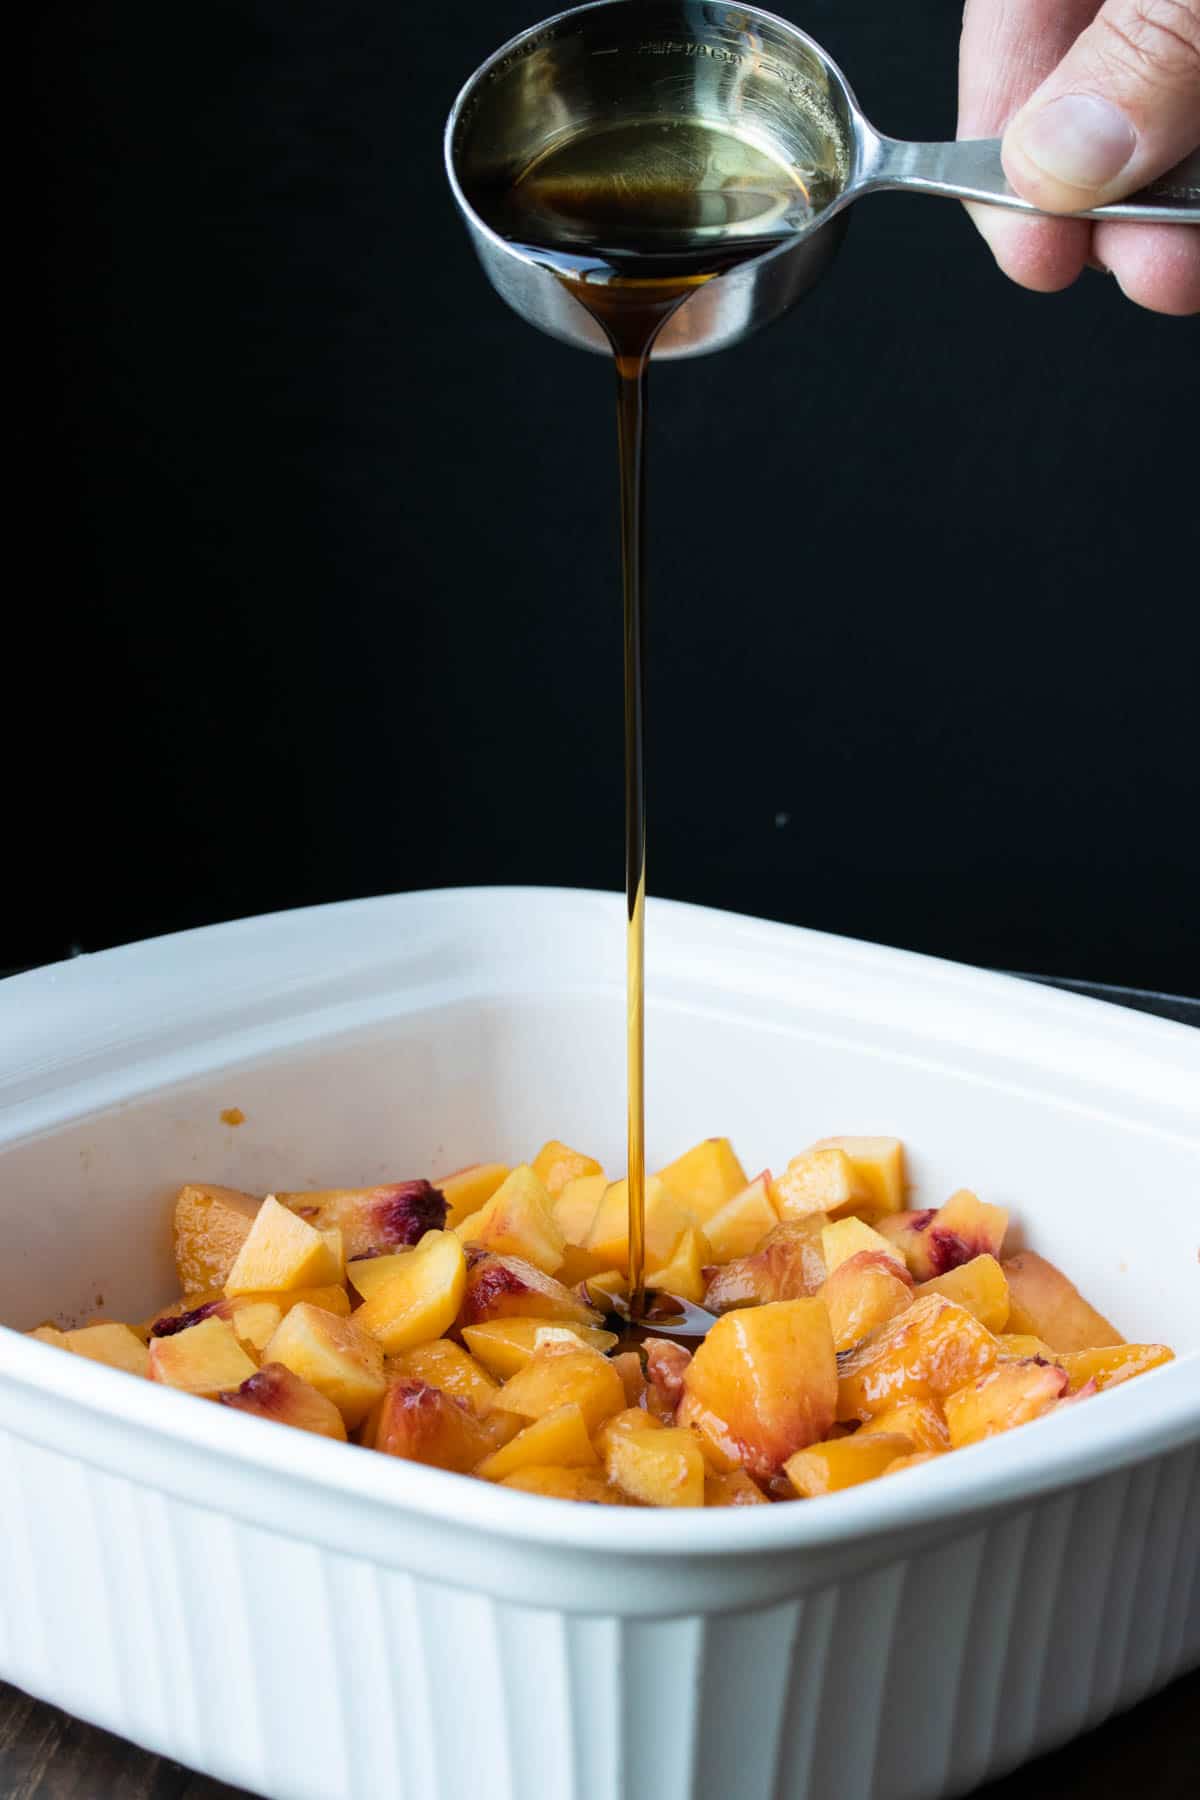 Maple syrup being poured into a white baking dish filled with peaches.